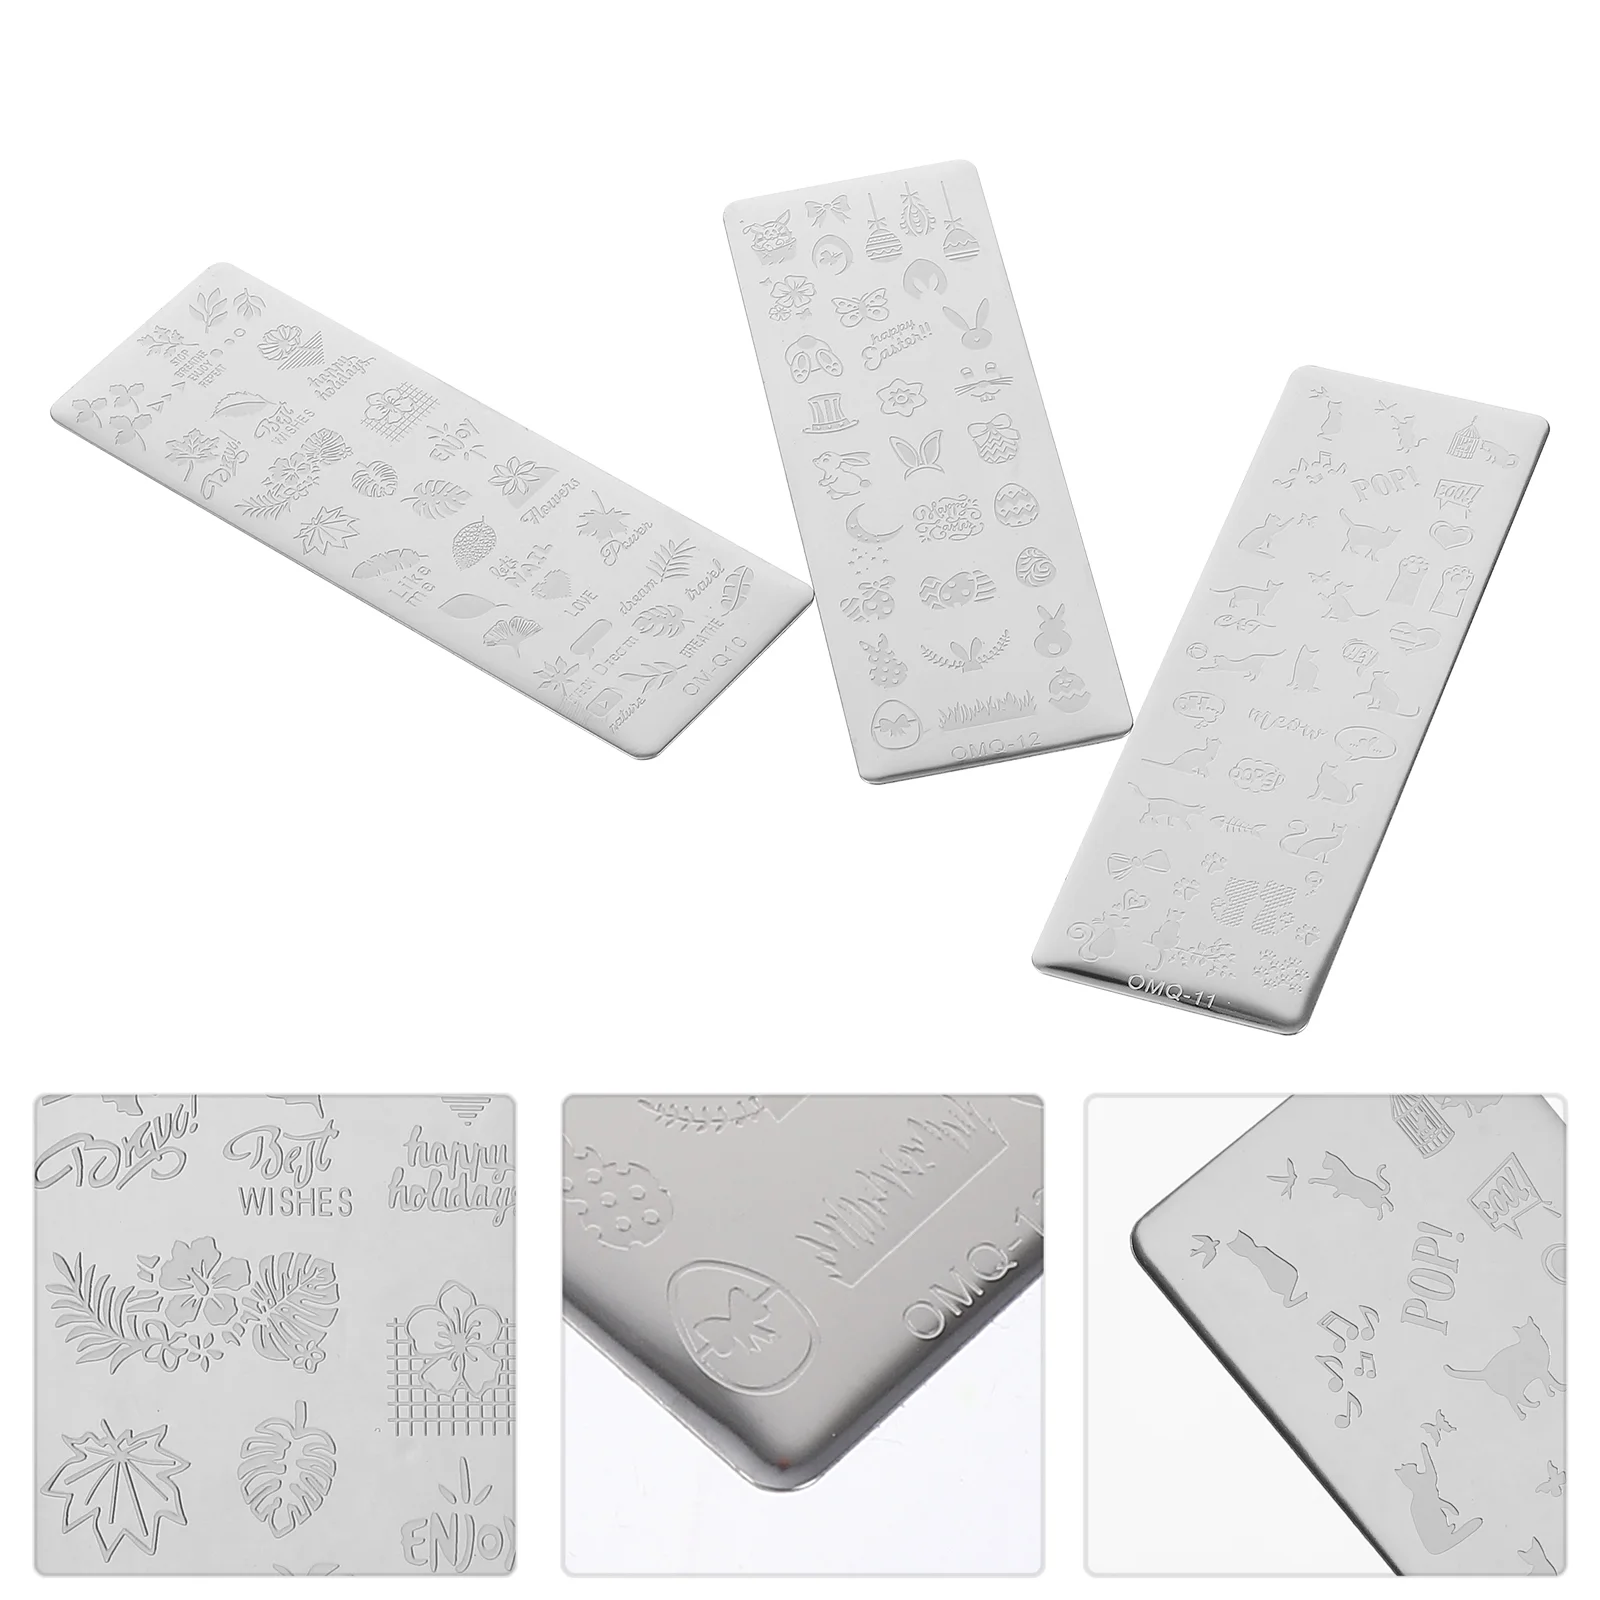 

Nail Stamping Easter Plates Stamper Plate Stamp Manicure Template Templates Stencils Decoration Kit Tool